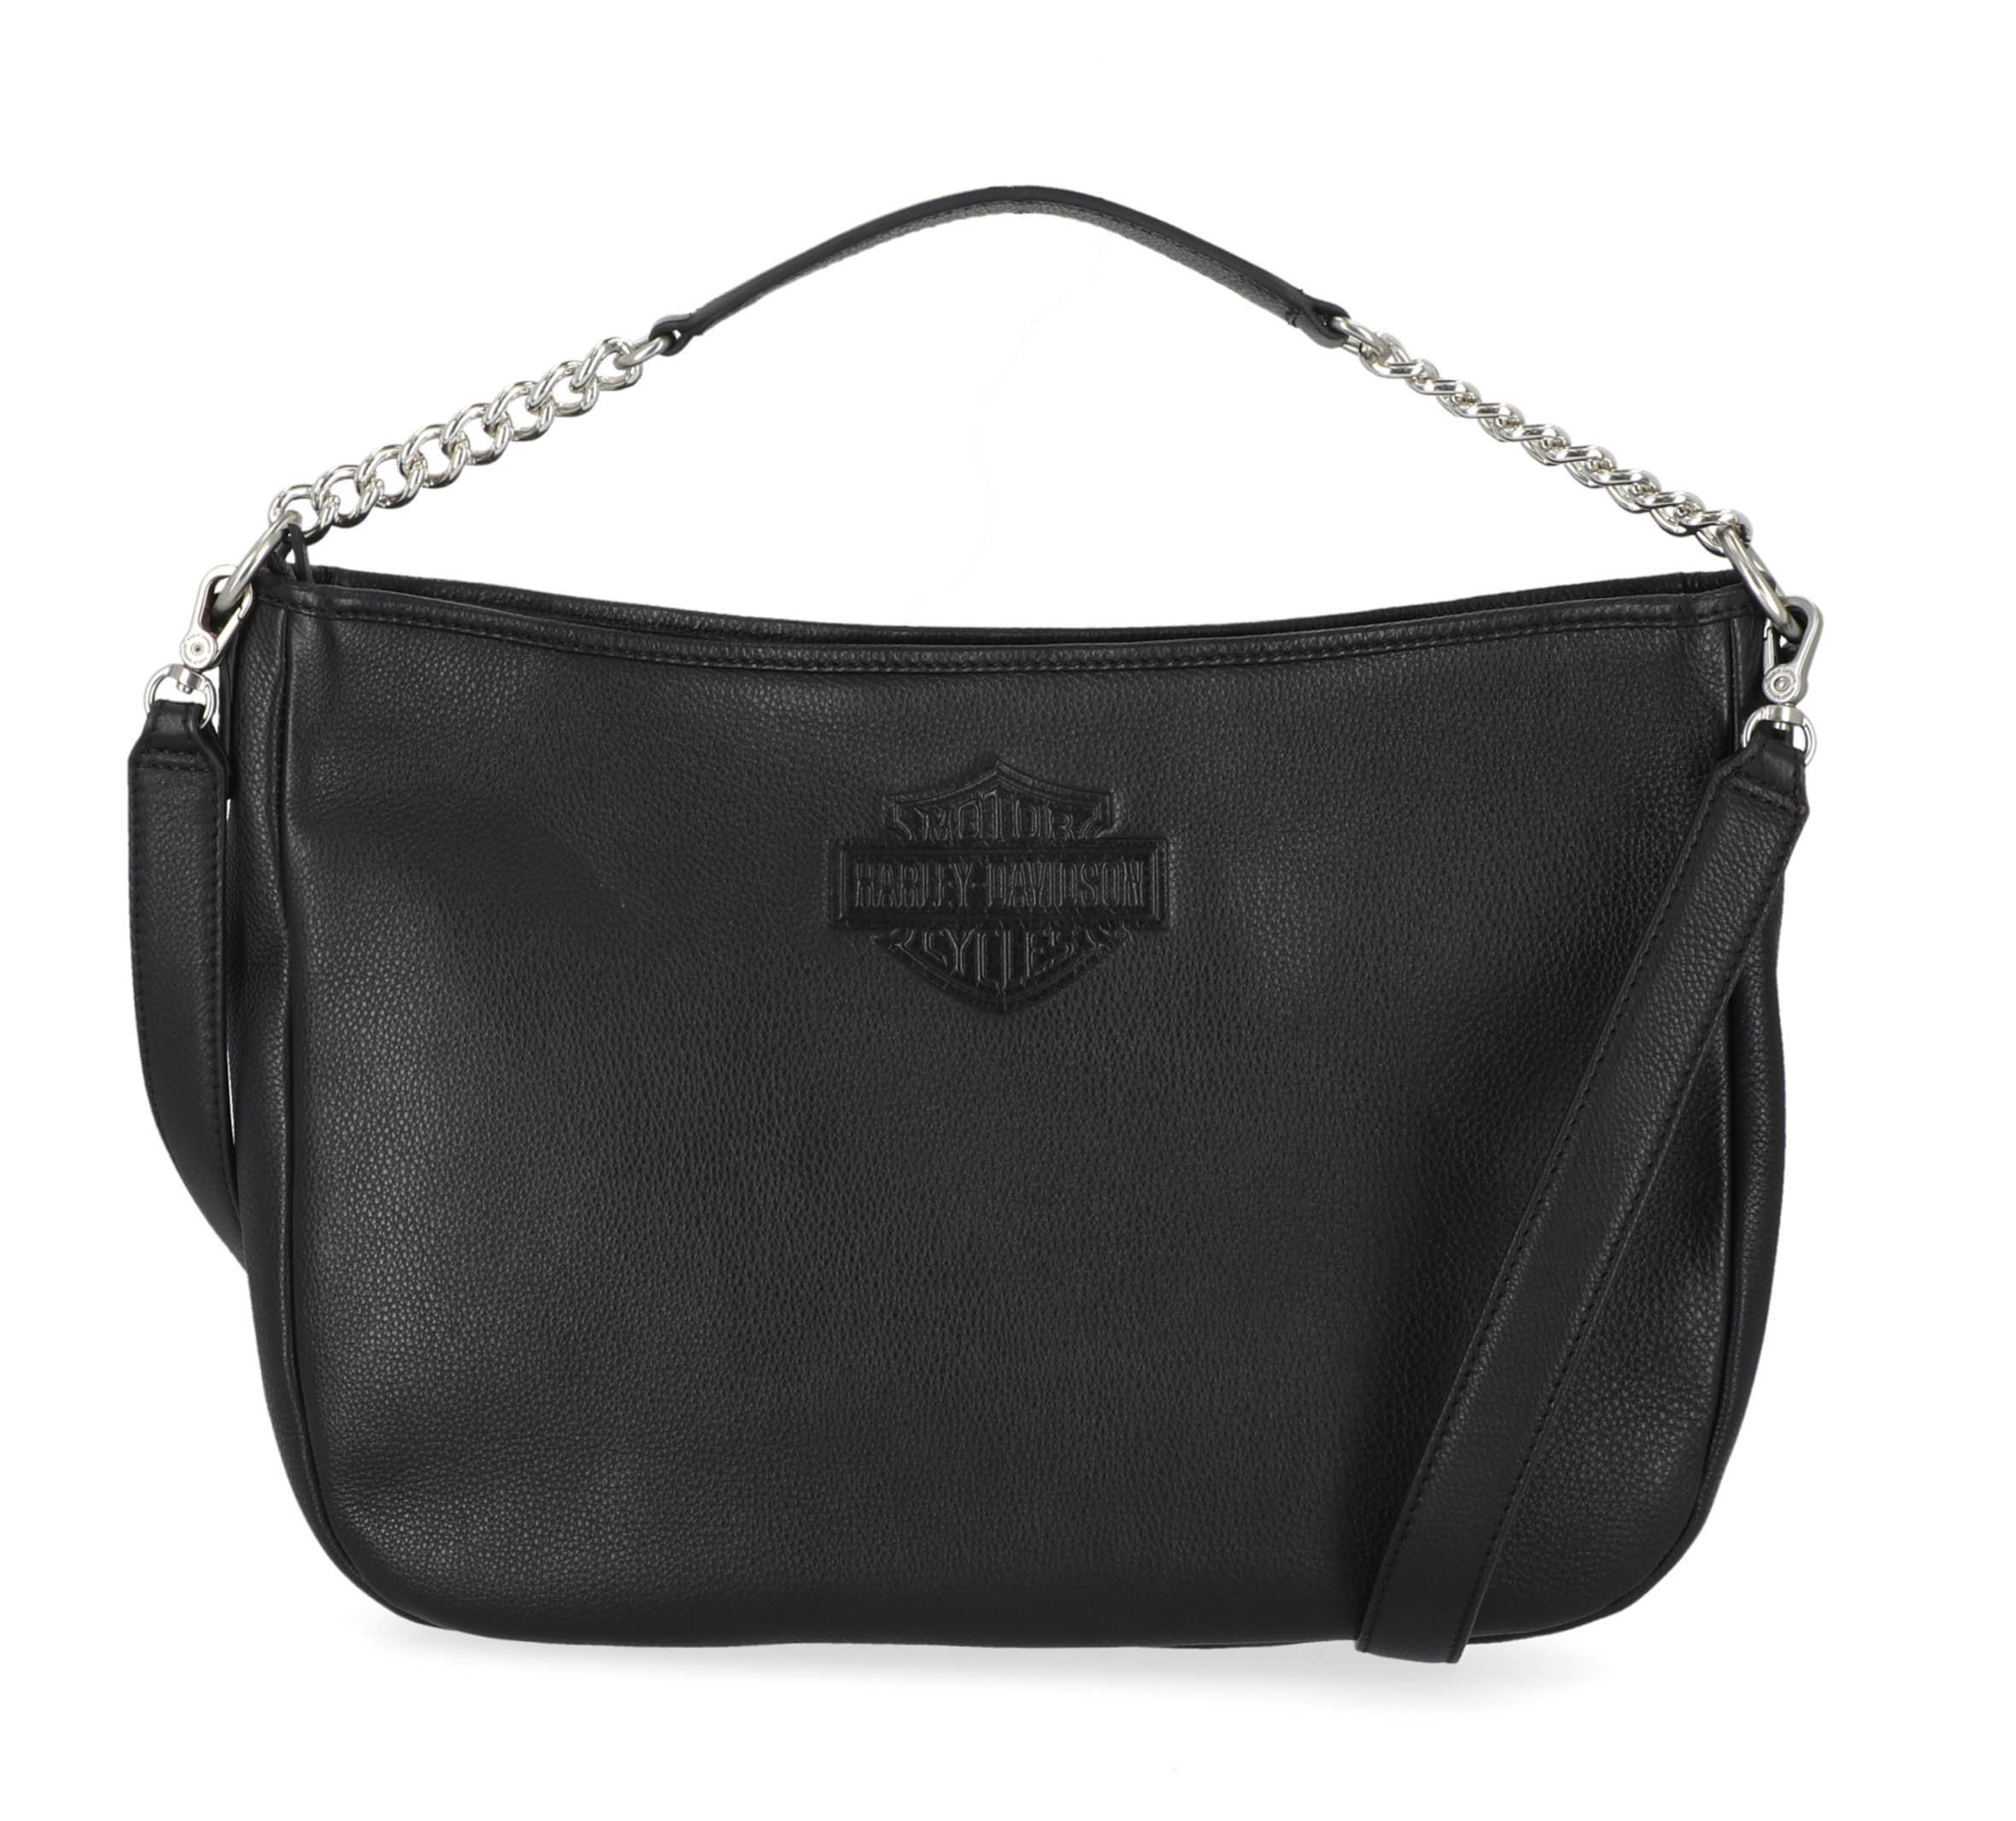 Just in women's Ombré purses. - White's Harley-Davidson